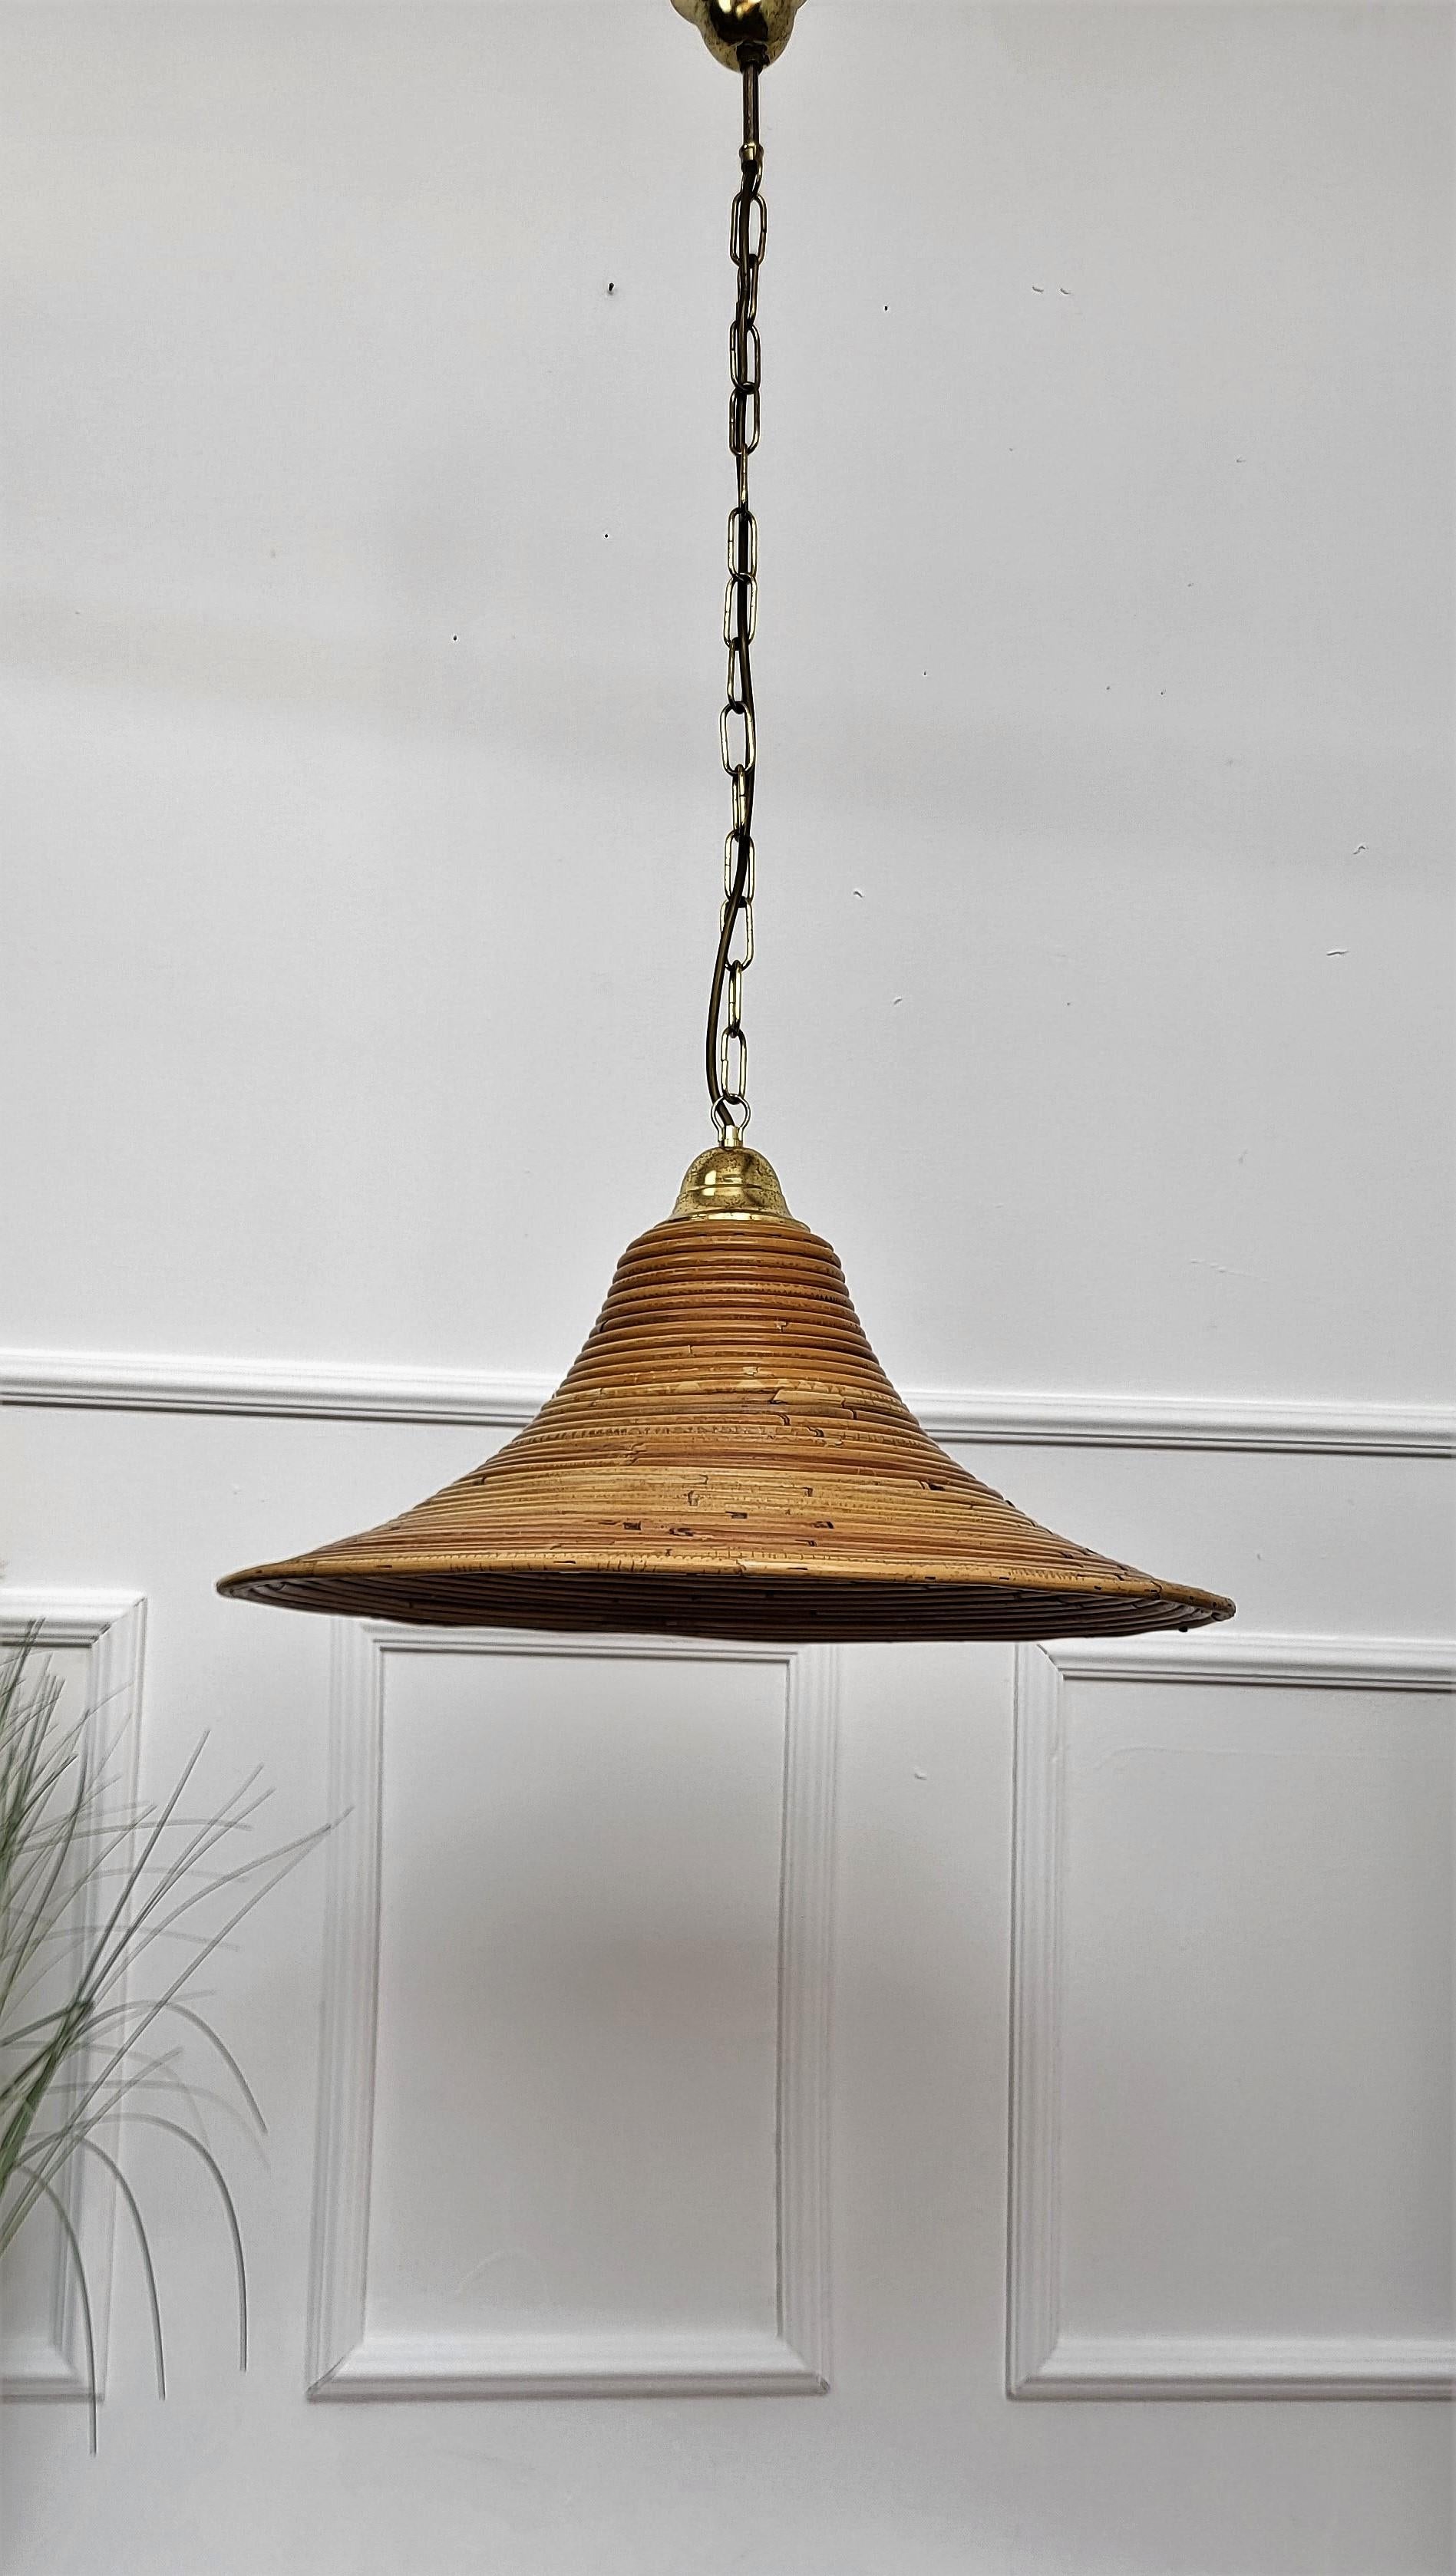 Eyecatching Italian 1960s handcrafted rattan pendant light with circular design. This suspension lamp has a bell shaped lampshade hanging from a gilt brass chain topped and ended by a very nice brass bun. The length of the chain can be shortened